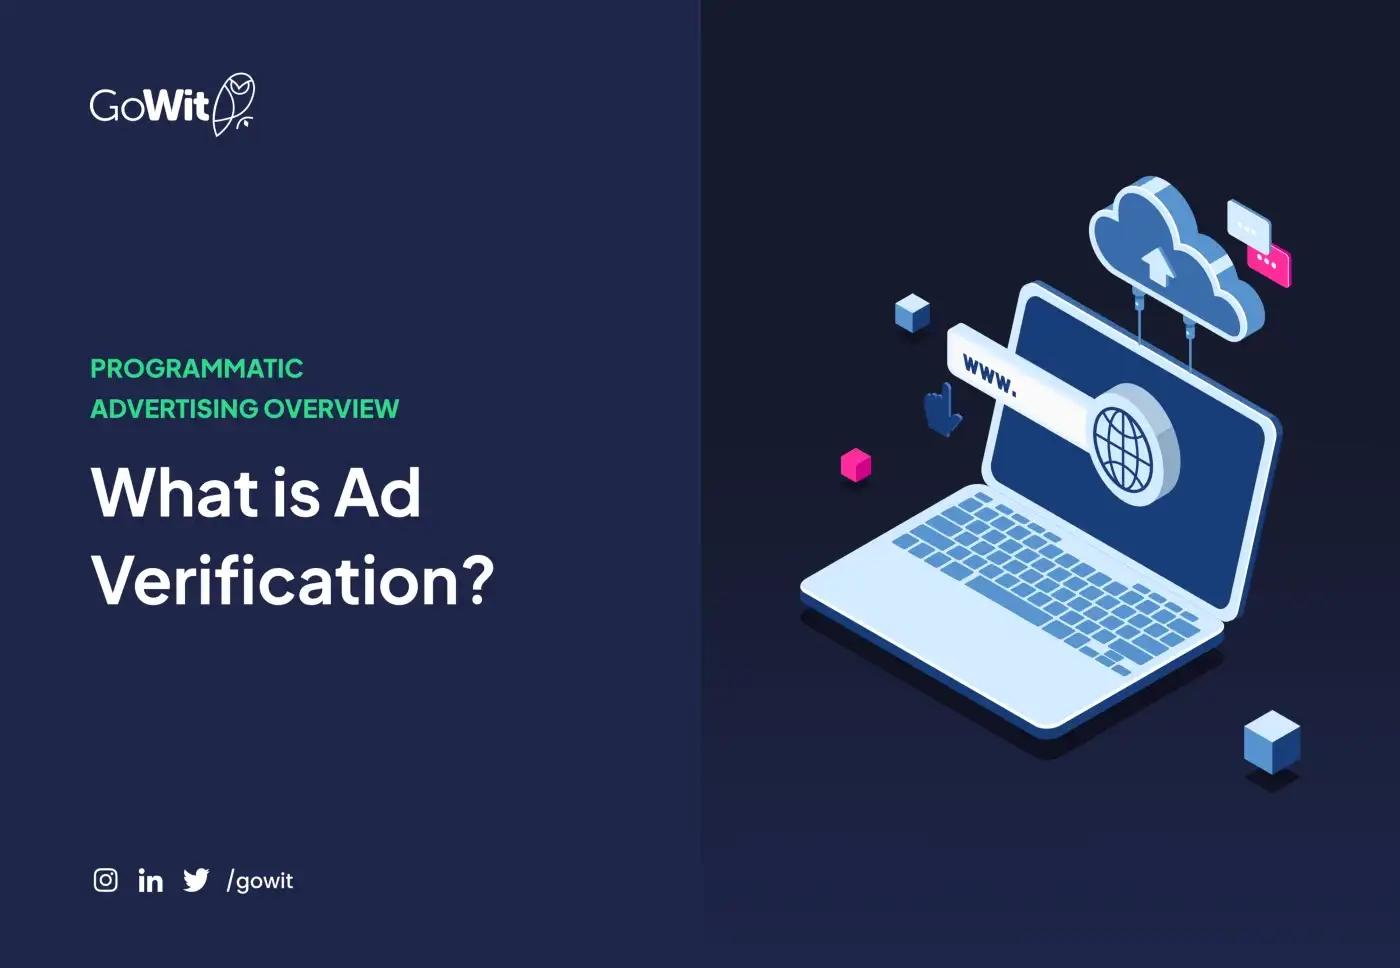 What is Ad Verification?